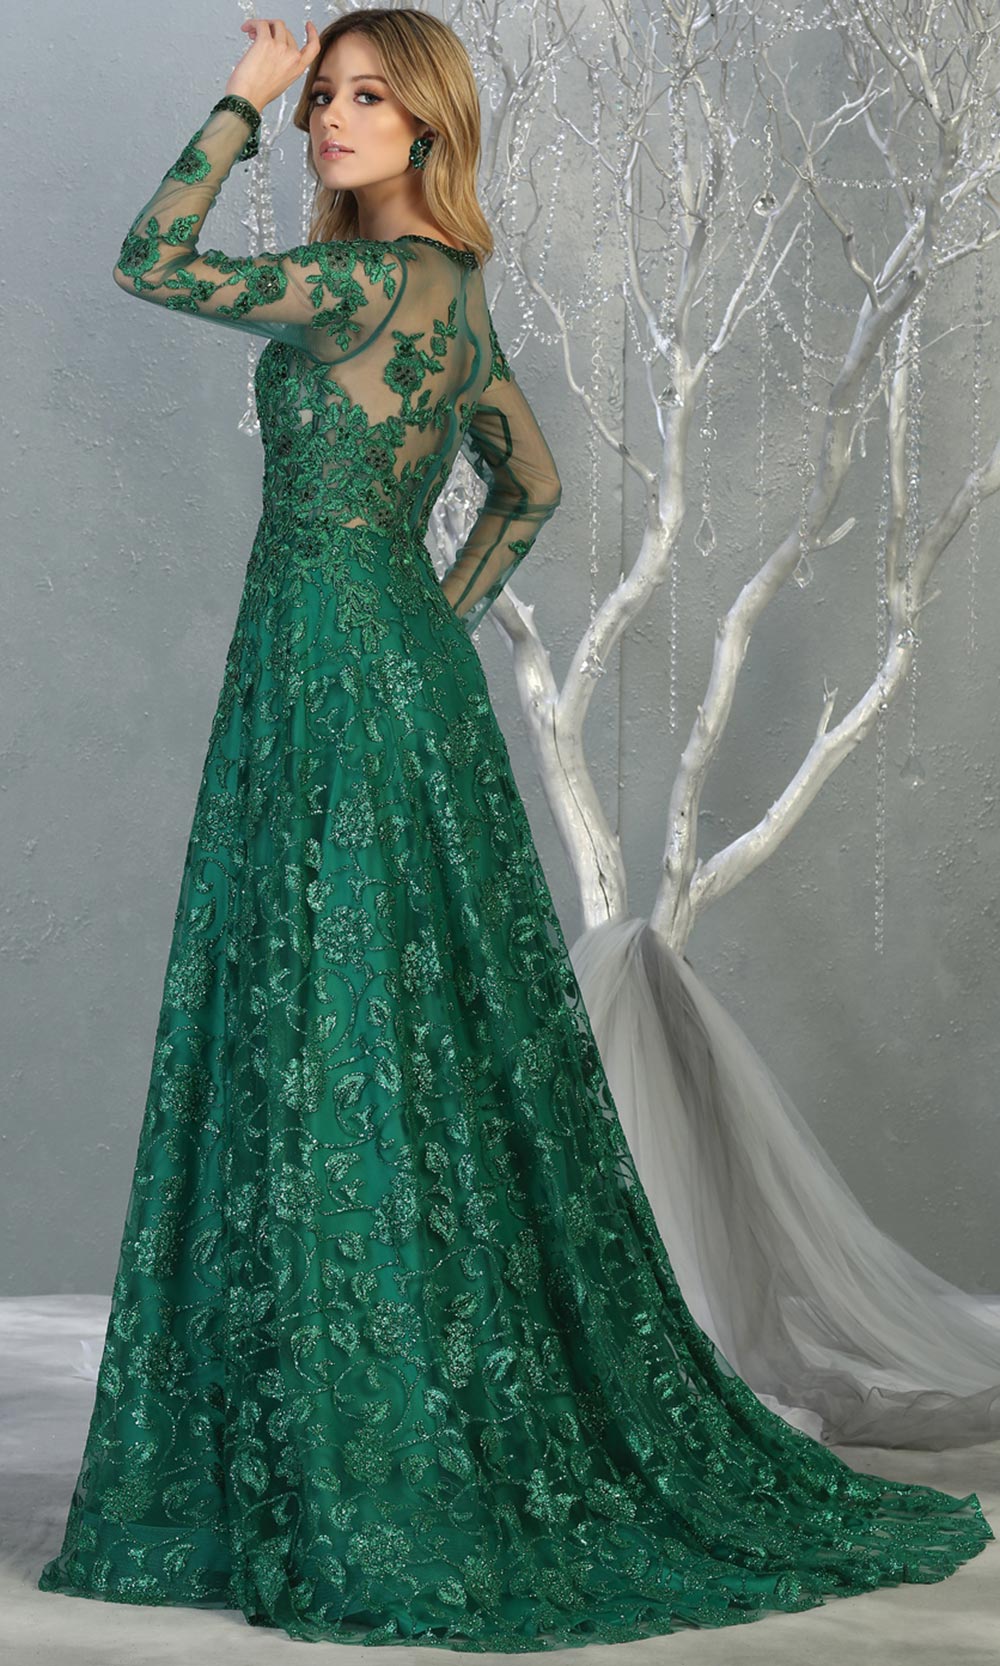 Mayqueen RQ7875 long hunter green modest evening dress w/long sleeves. Full length dark green flowy gown is perfect for  enagagement/e-shoot dress, mother of bride, muslim evening party dress, prom, indowestern, wedding reception. Plus sizes avail-b.jpg